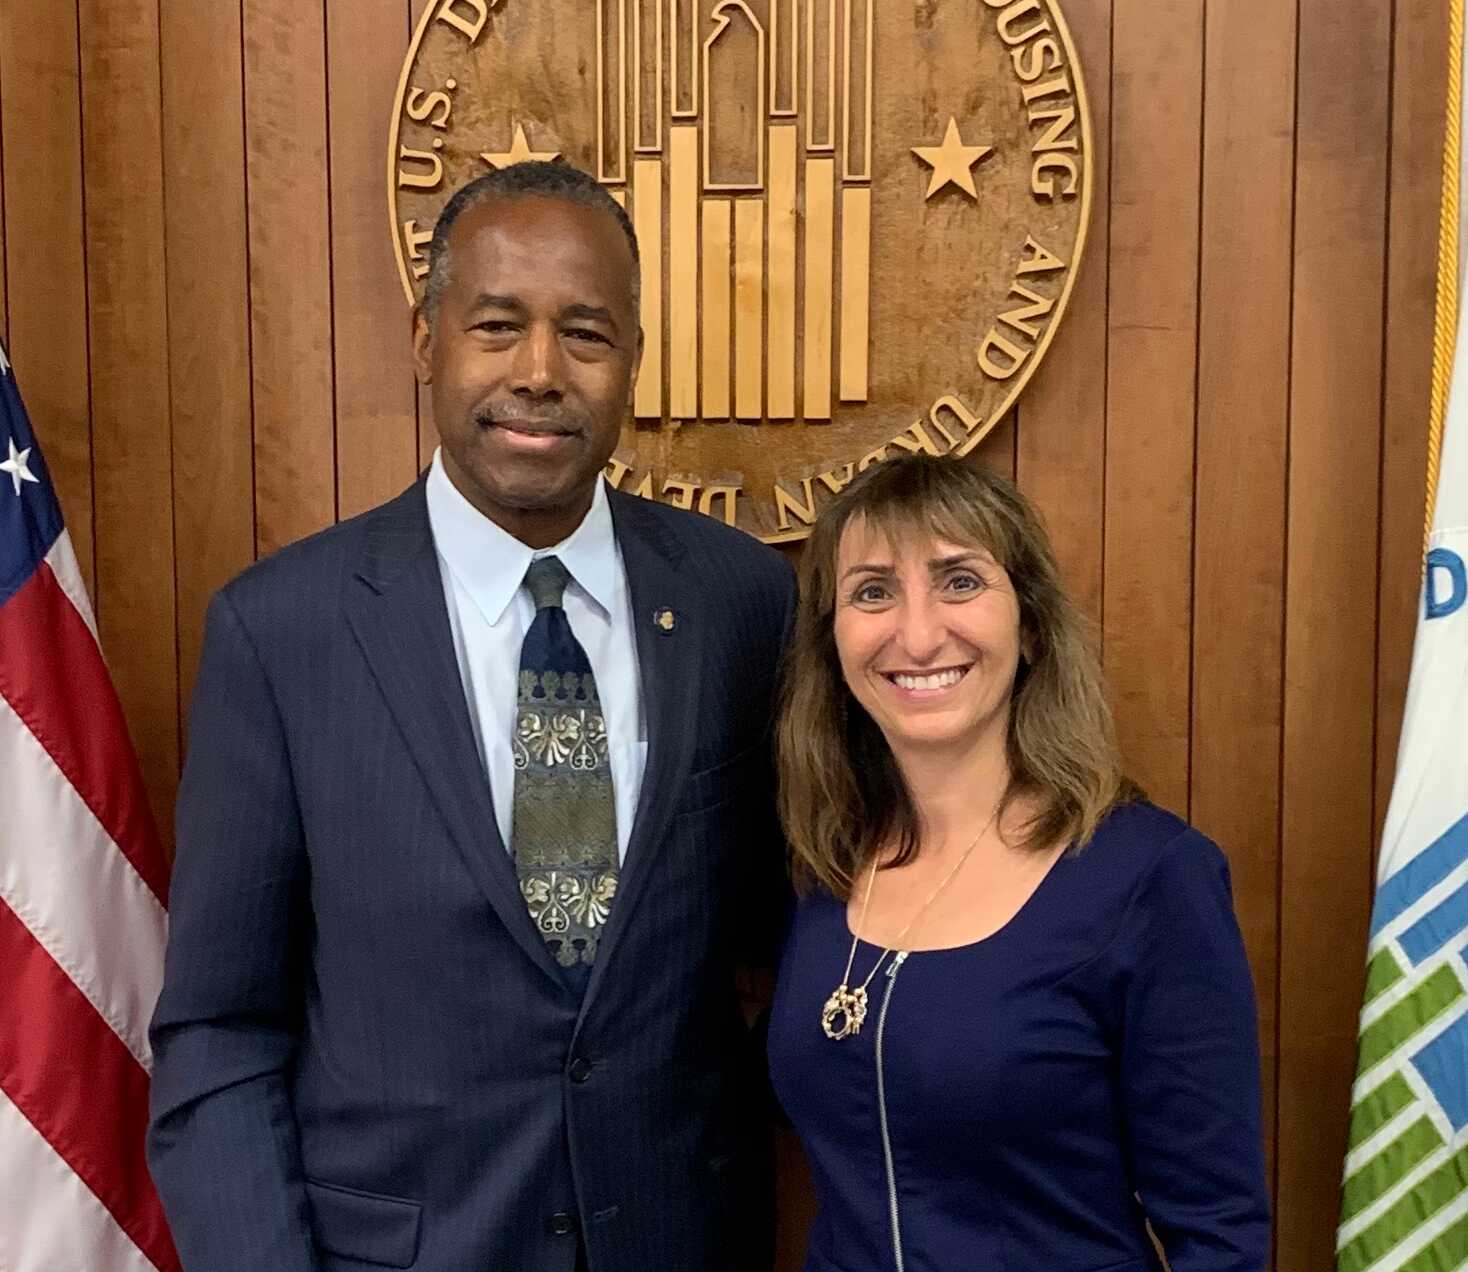 Episode #4 - High Truths on Drugs and Addiction  Secretary Dr. Ben Carson. The Trifecta of Addiction, Mental Health, and Homelessness.